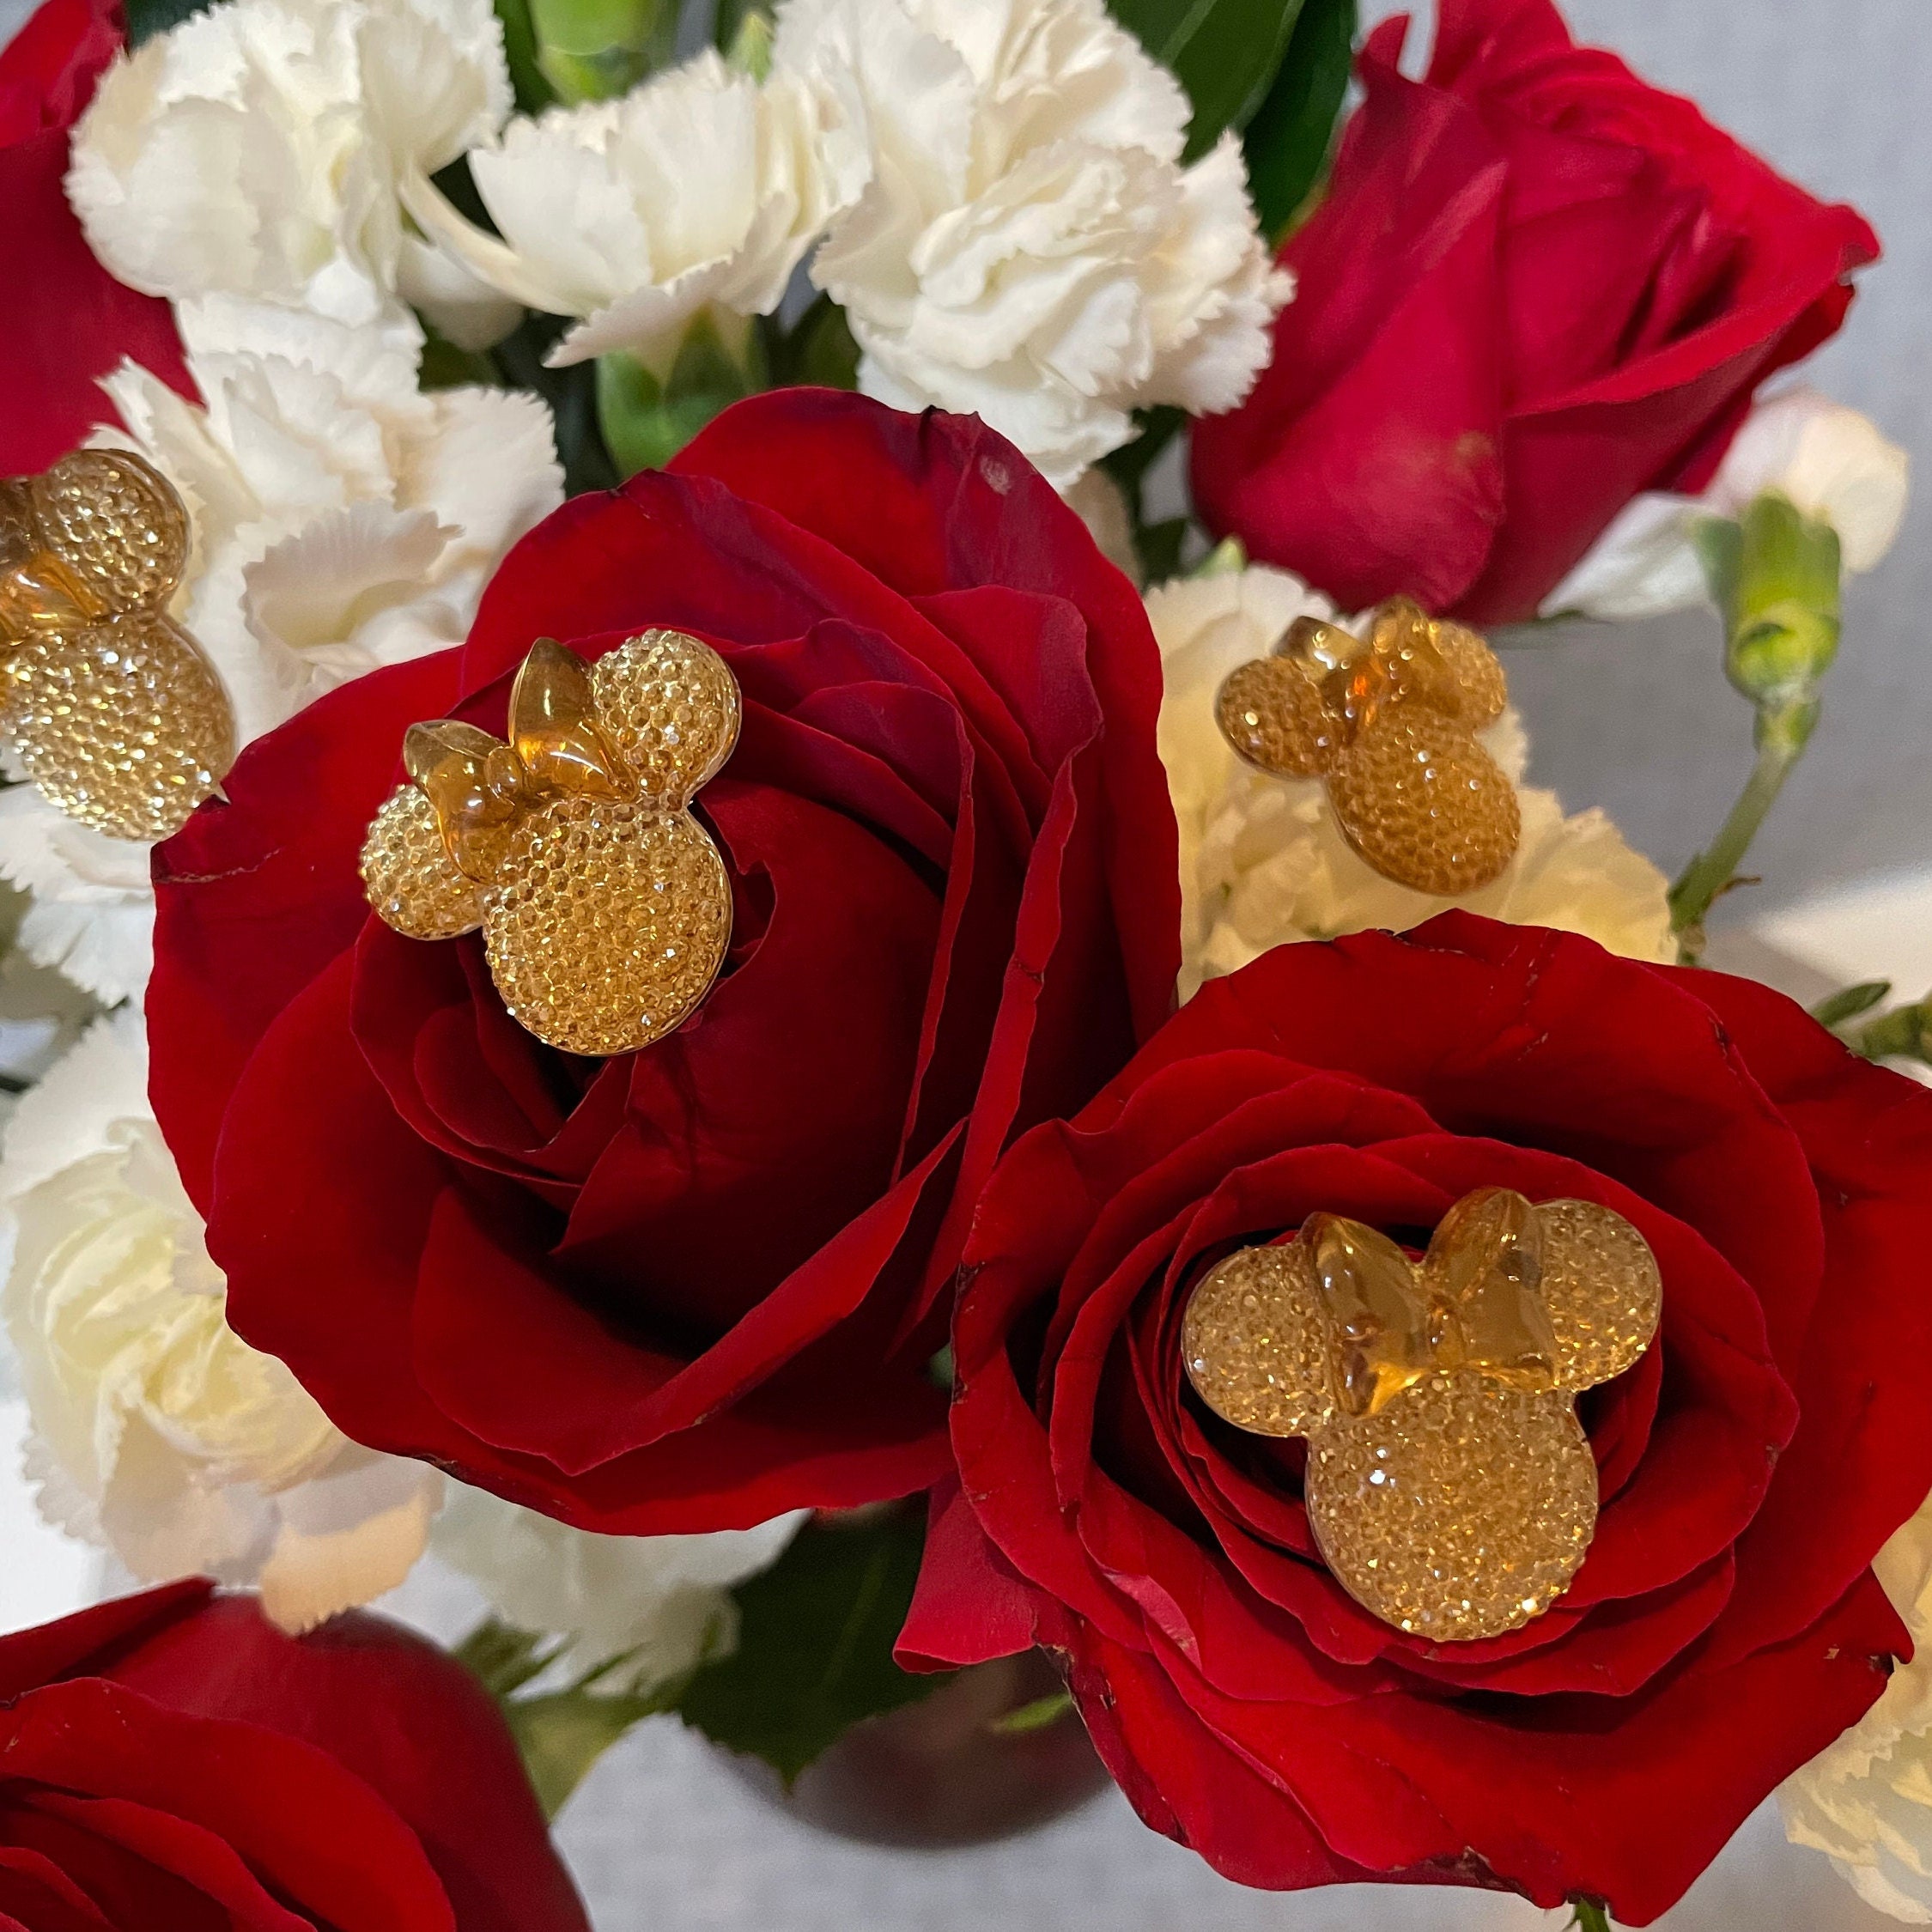 Disney Wedding Flower Pin 6 Hidden Mickey Mouse Ears Bouquets Centerpieces  Boutonnieres Flower Picks Floral Pins Flower Posts Bridal Flowers